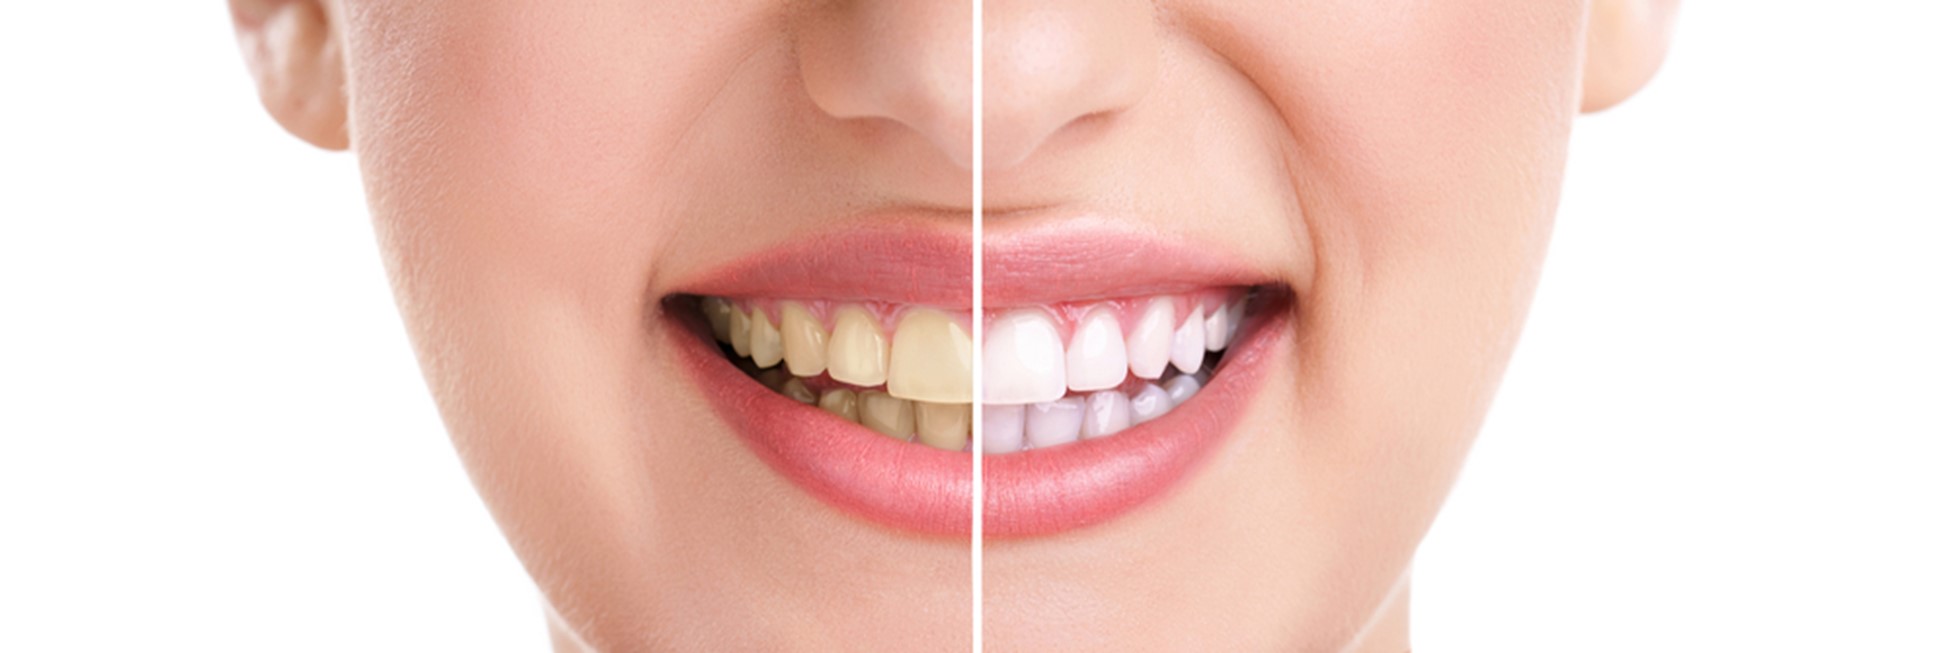 woman's teeth before and after teeth whitening treatment